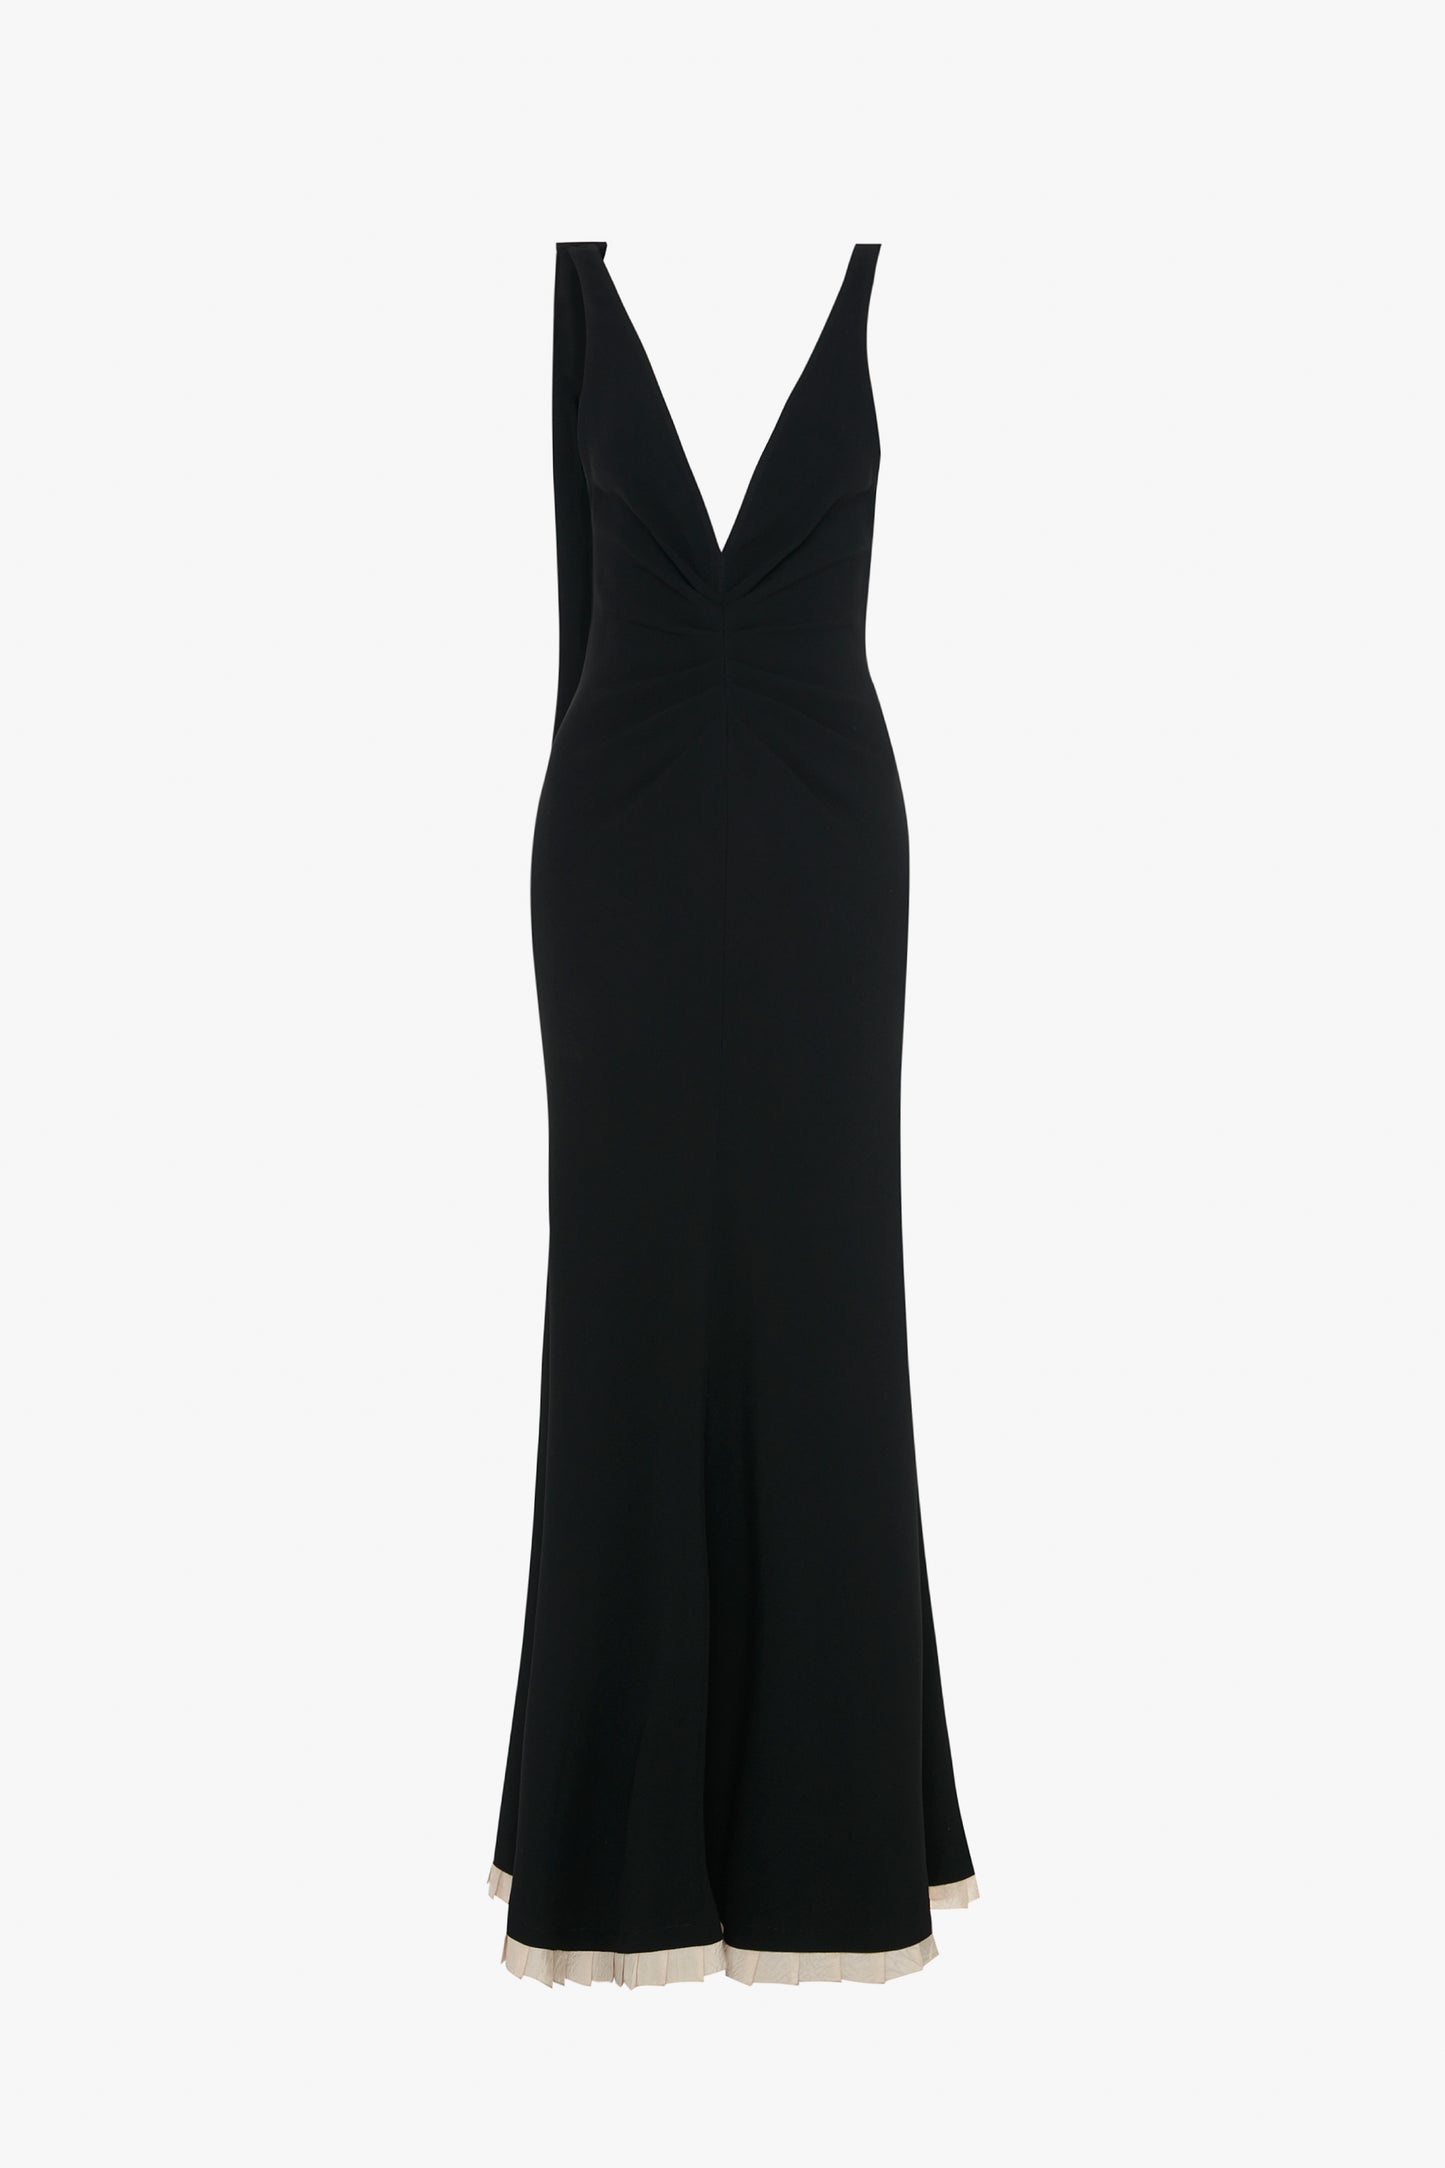 A Victoria Beckham V-Neck Gathered Waist Floor-Length Gown In Black, with a deep-V neckline and a fitted design, creating a flattering silhouette. The hem features a subtle beige lining.